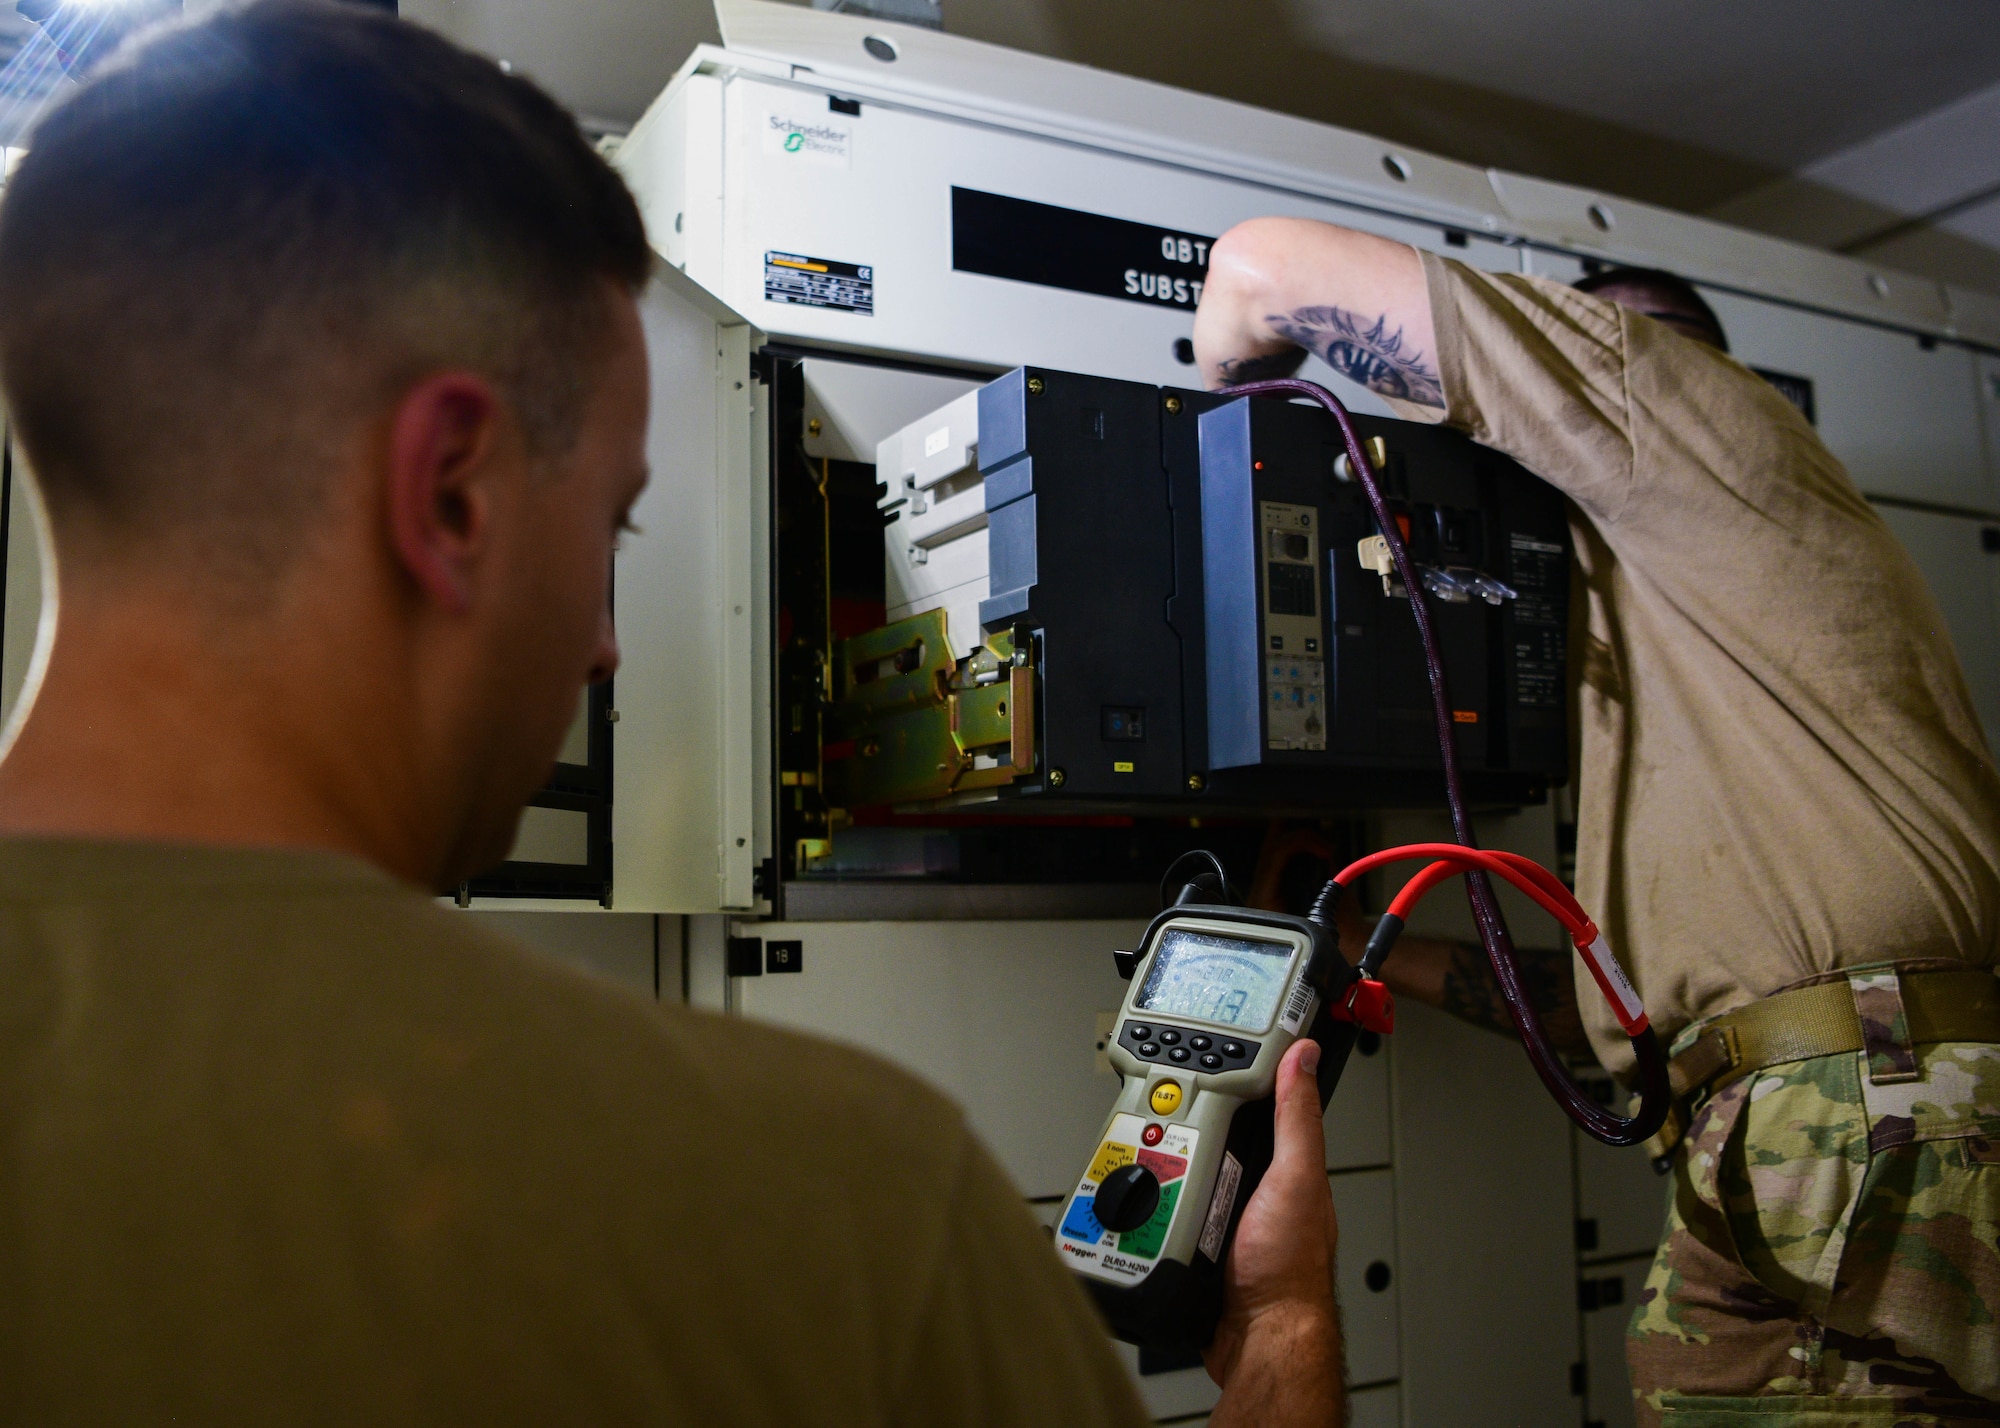 U.S. Air Force Tech. Sgt. Jacob Lanzer, Civil Engineer Maintenance, Inspection and Repair Team craftsman, left, monitors the resistance value on a circuit breaker while U.S. Air Force Master Sgt. Blake Meyer, CEMIRT electrical NCO in charge cleans the breaker during routine maintenance at Aviano Air Base, Italy, June 21, 2022. The DLRO-H200 is designed to measure the resistance of circuit breaker contacts, bus-bar joints and other high-current links. (U.S. Air Force photo by Senior Airman Brooke Moeder)